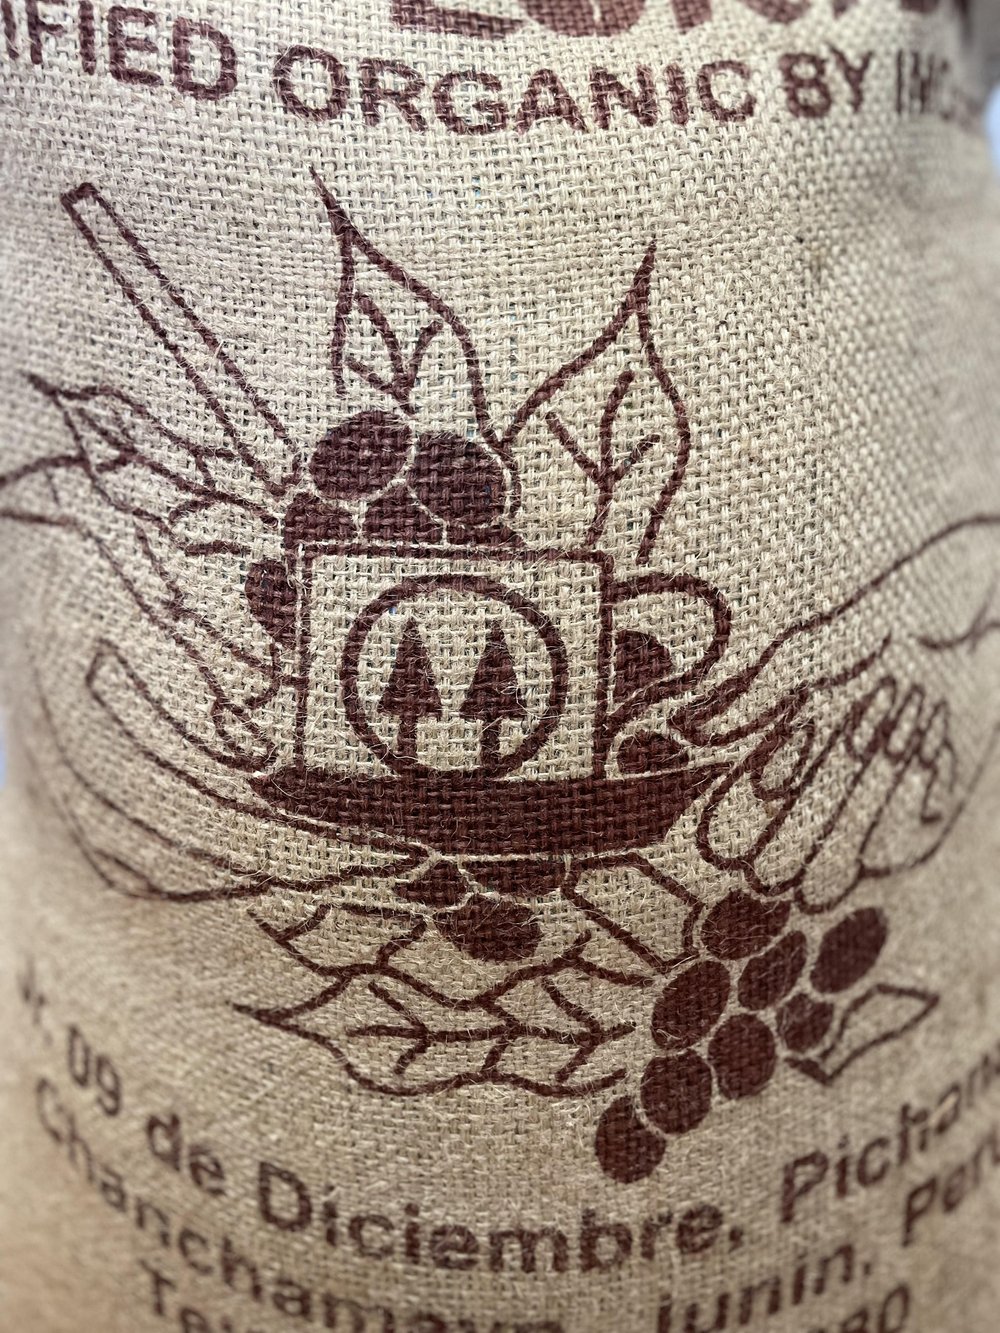 A burlap sack that has a coffee cup and coffee cherries on it